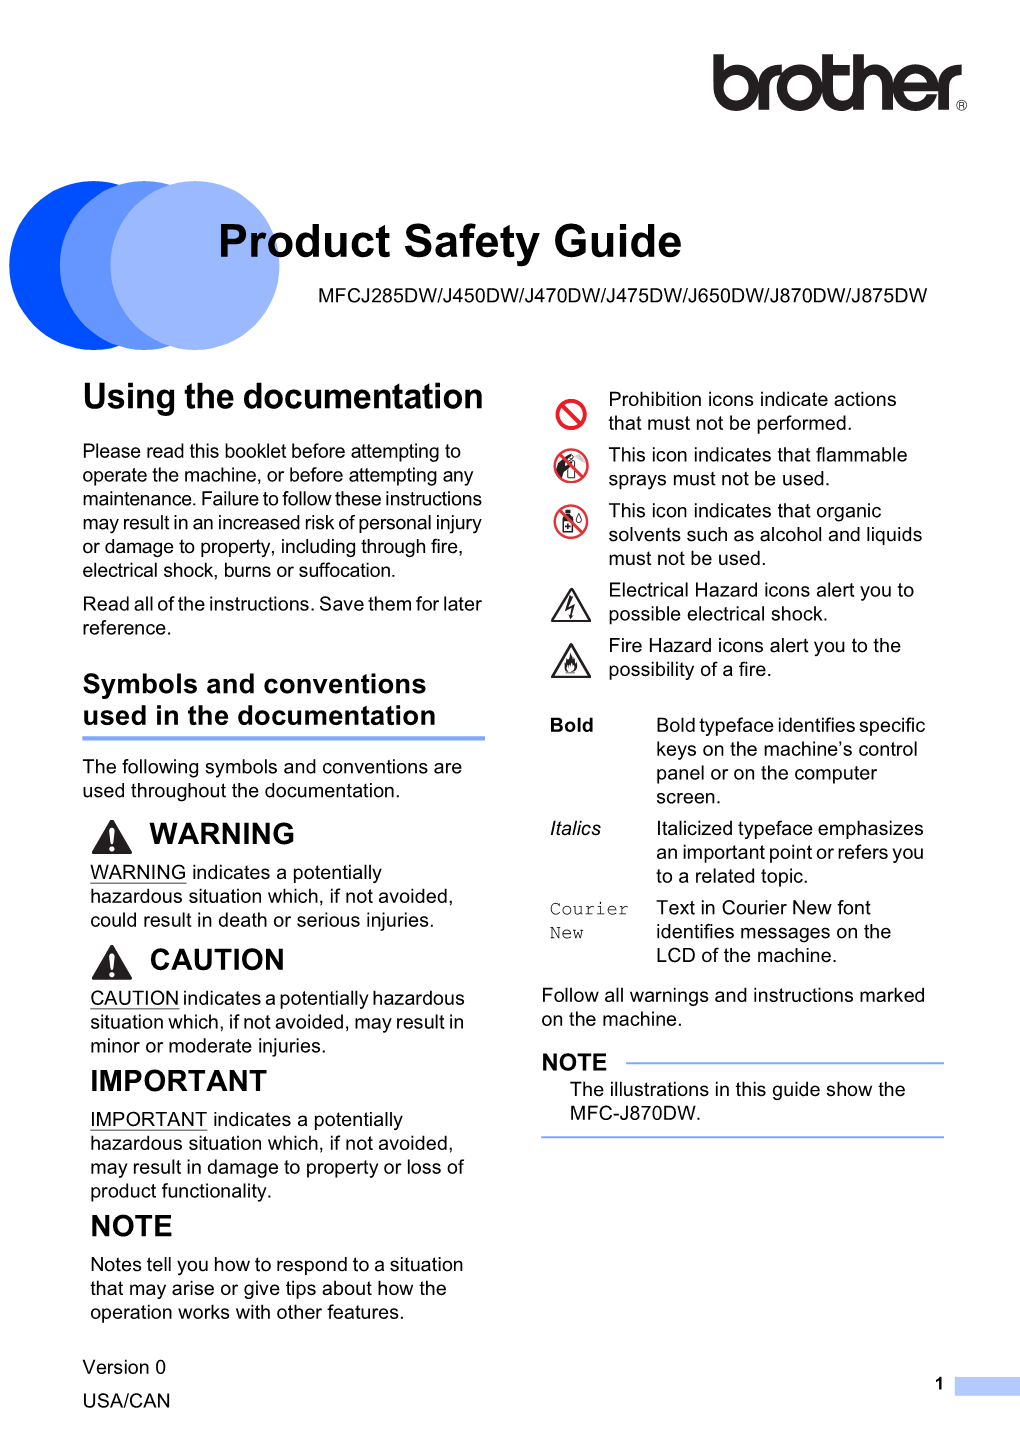 Product Safety Guide 1